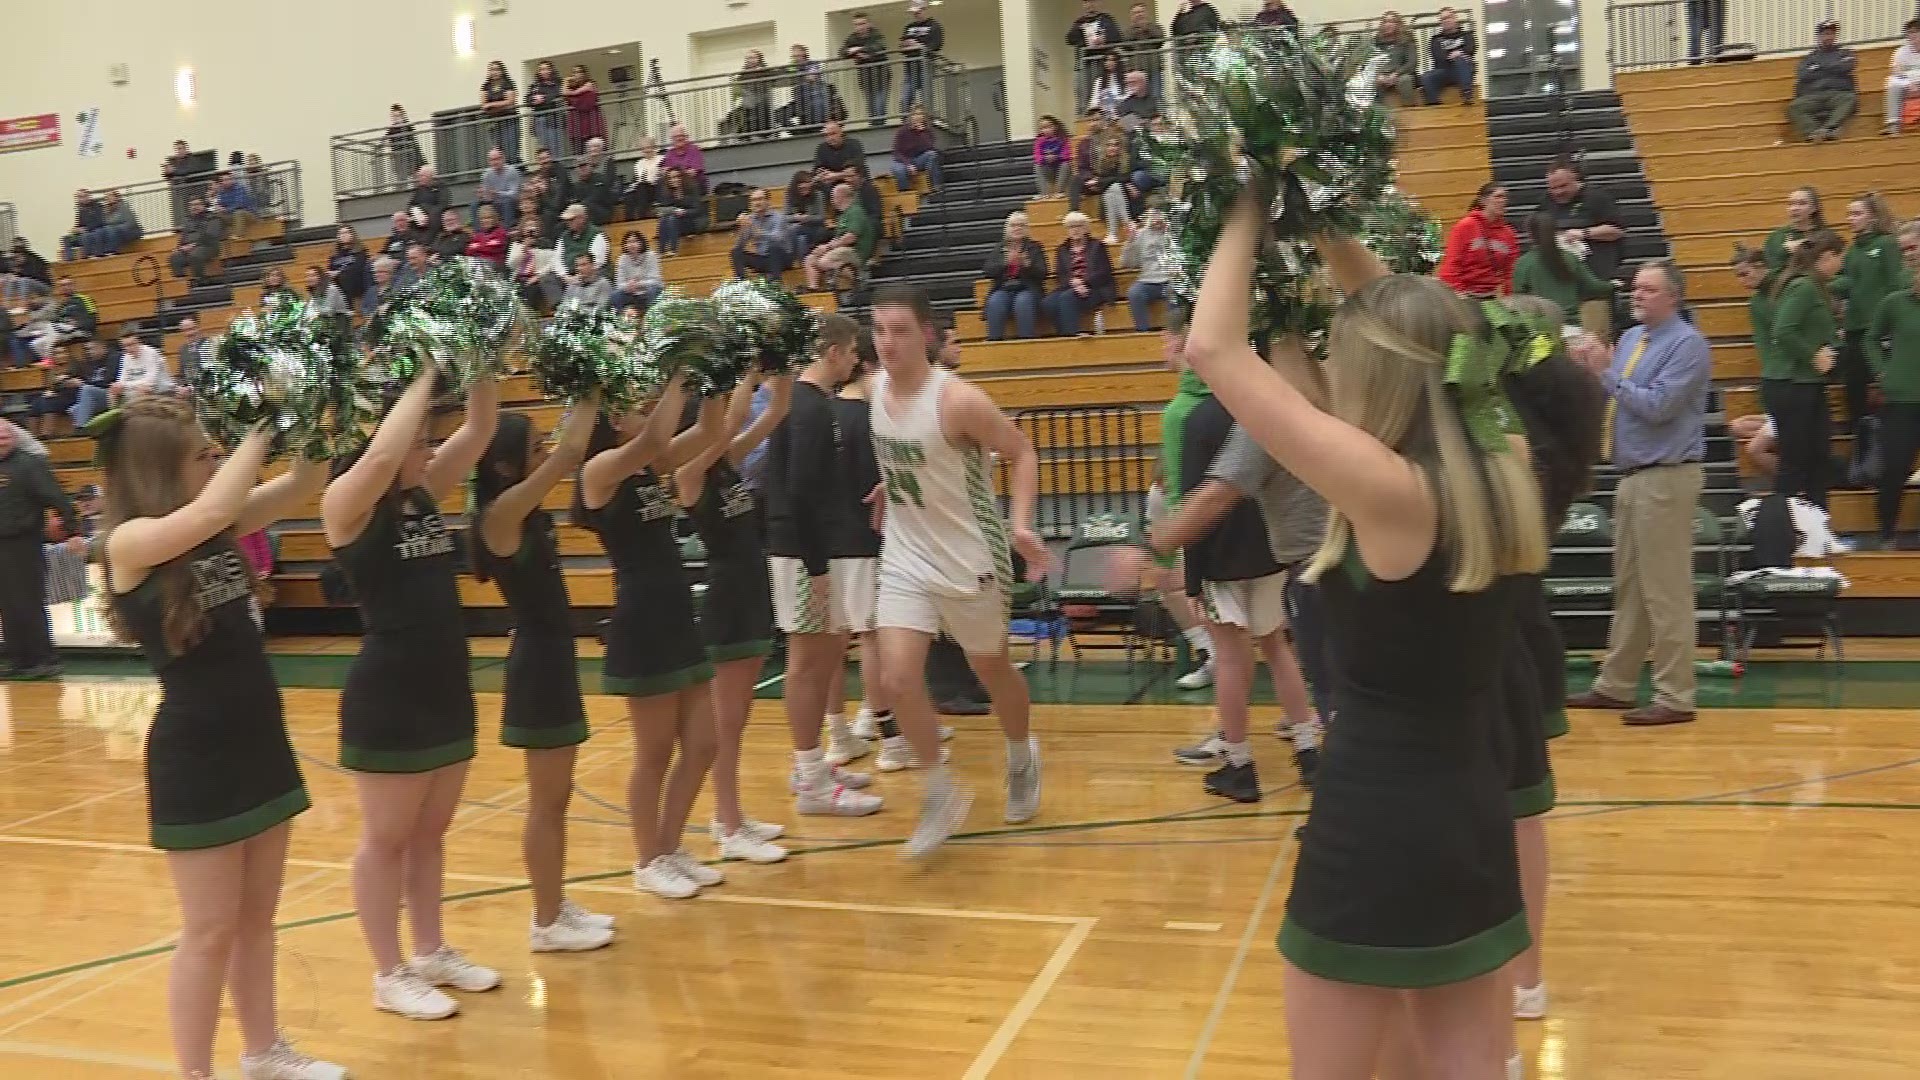 Highlights of West Salem's 84-52 win over McKay on Feb. 8, 2020. Highlights are part of KGW's Friday Night Hoops with Orlando Sanchez.